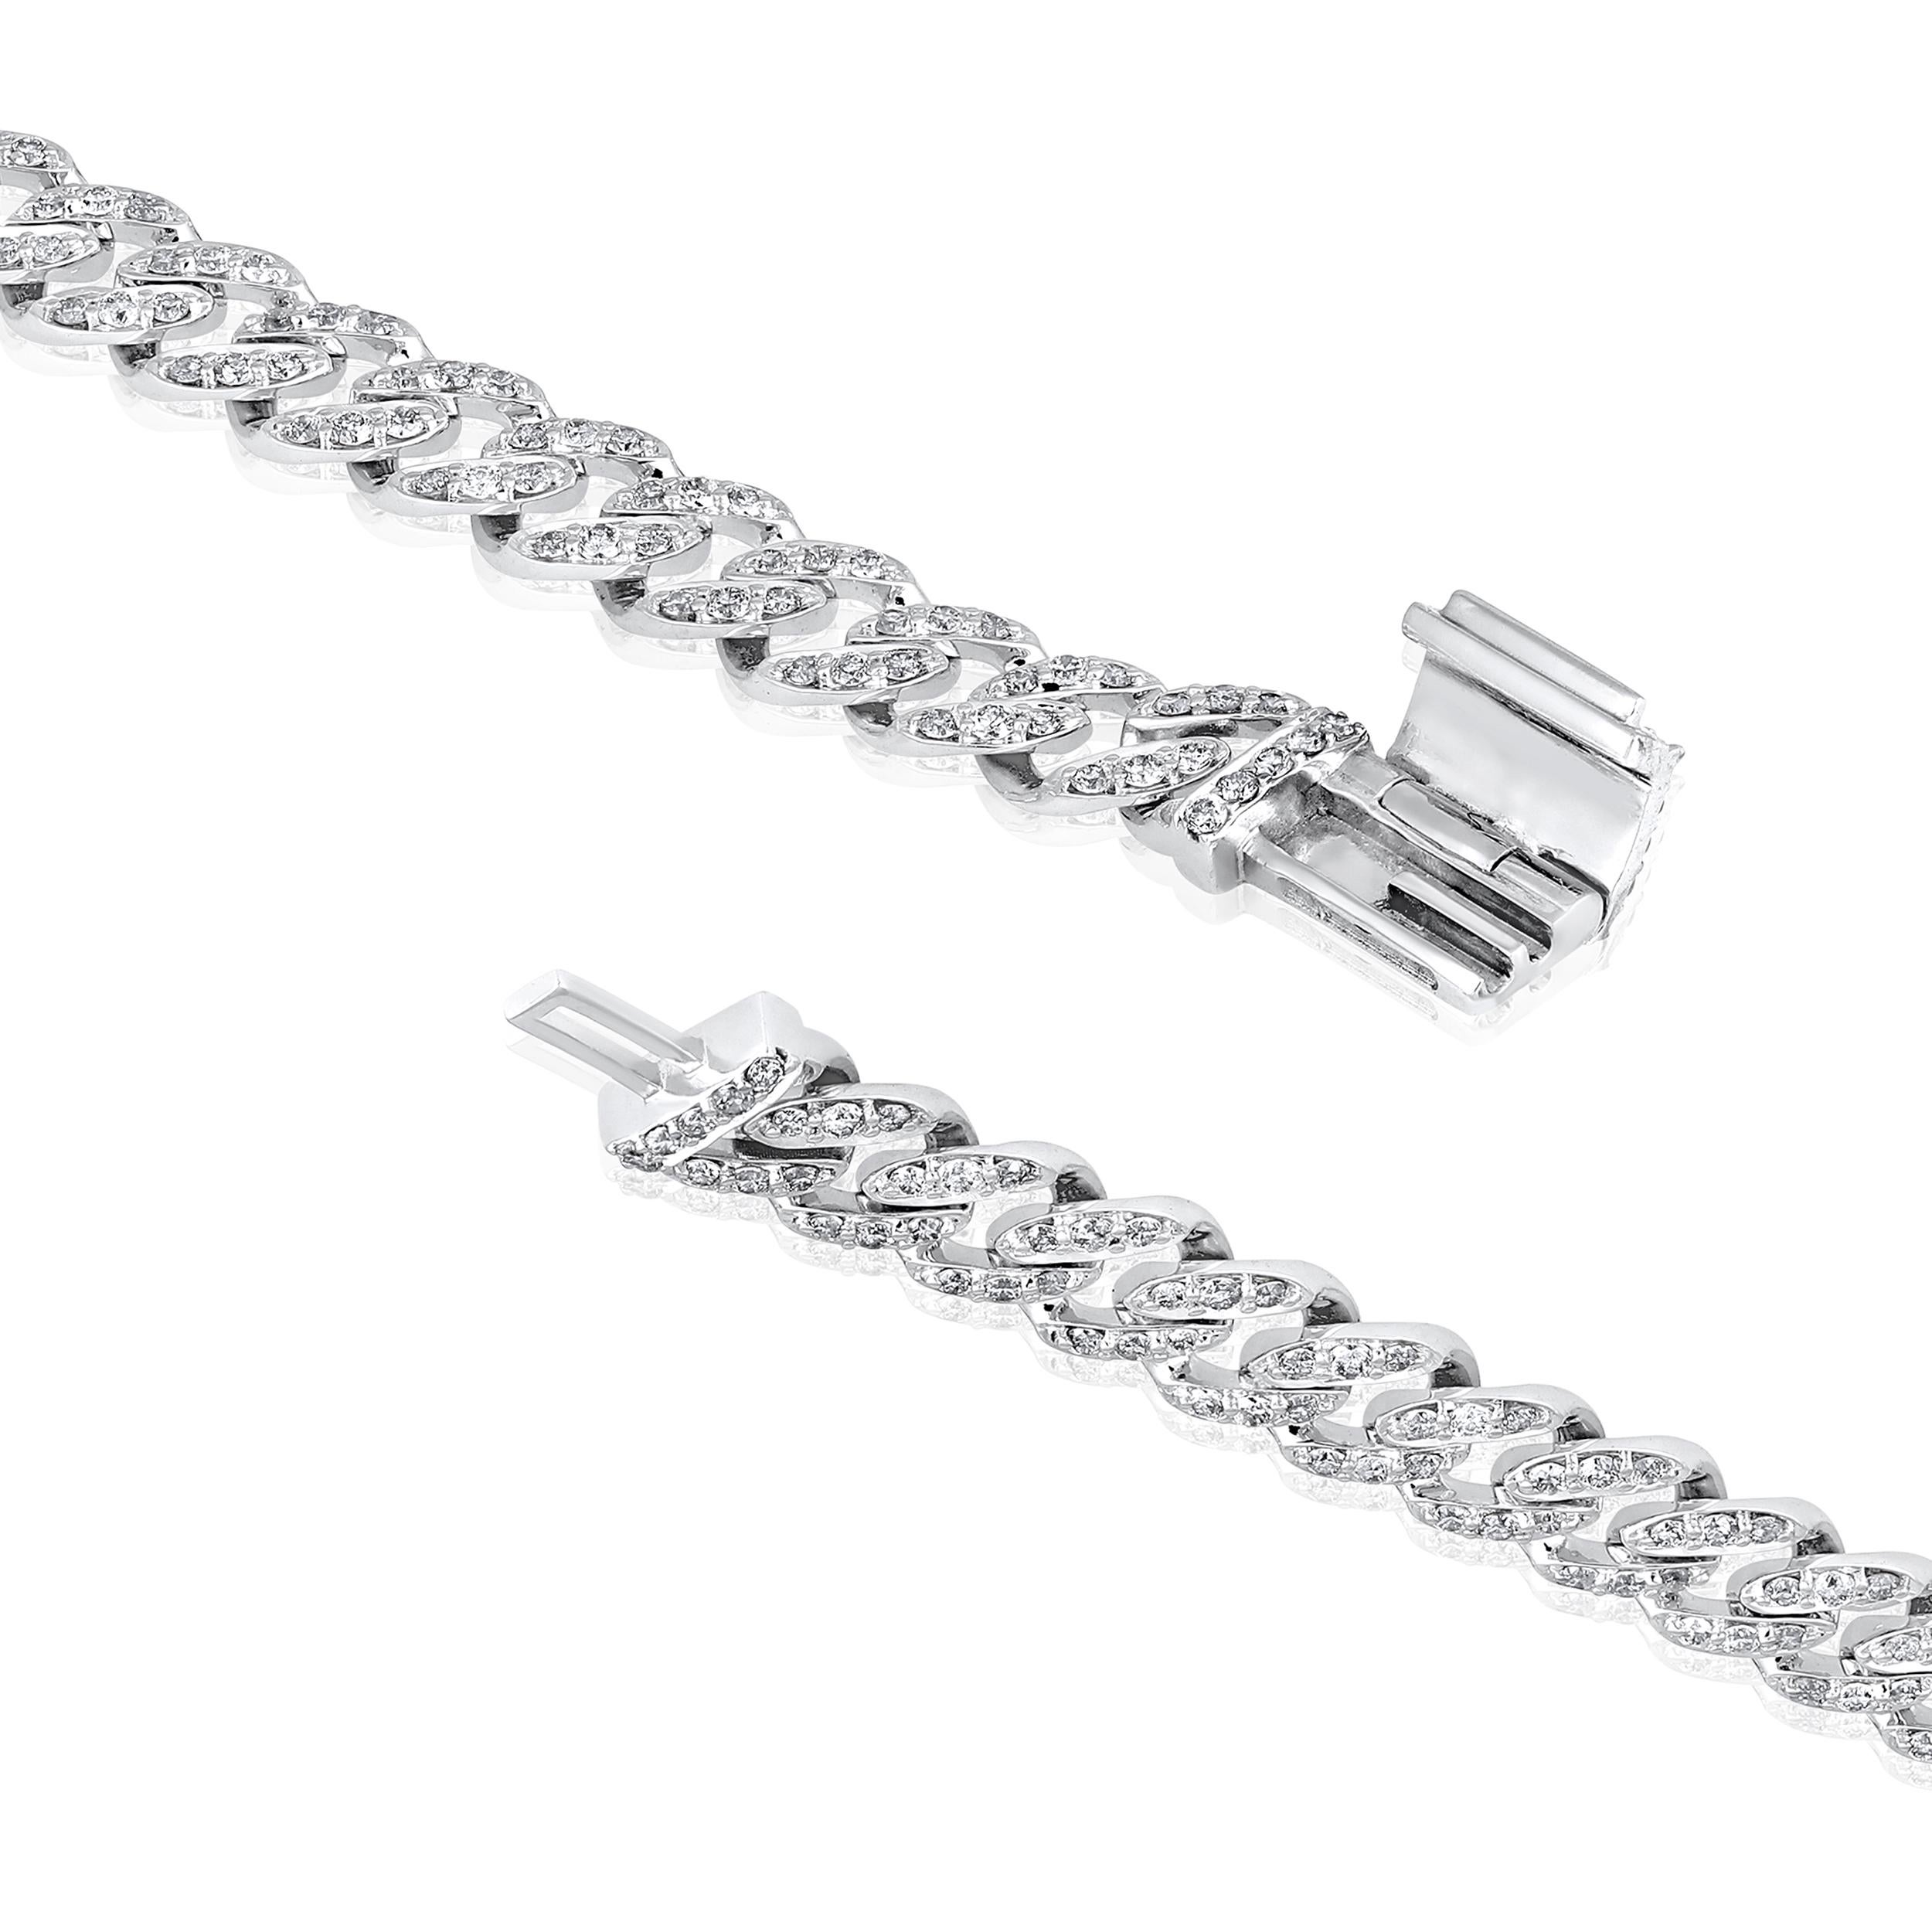 Crafted in 7.21 grams of 10K White Gold, the bracelet contains 321 stones of Round Diamonds with a total of 1.32 carat in F-G color and I1-I2 carat. The bracelet length is 7 inches.

CONTEMPORARY AND TIMELESS ESSENCE: Crafted in 14-karat/18-karat